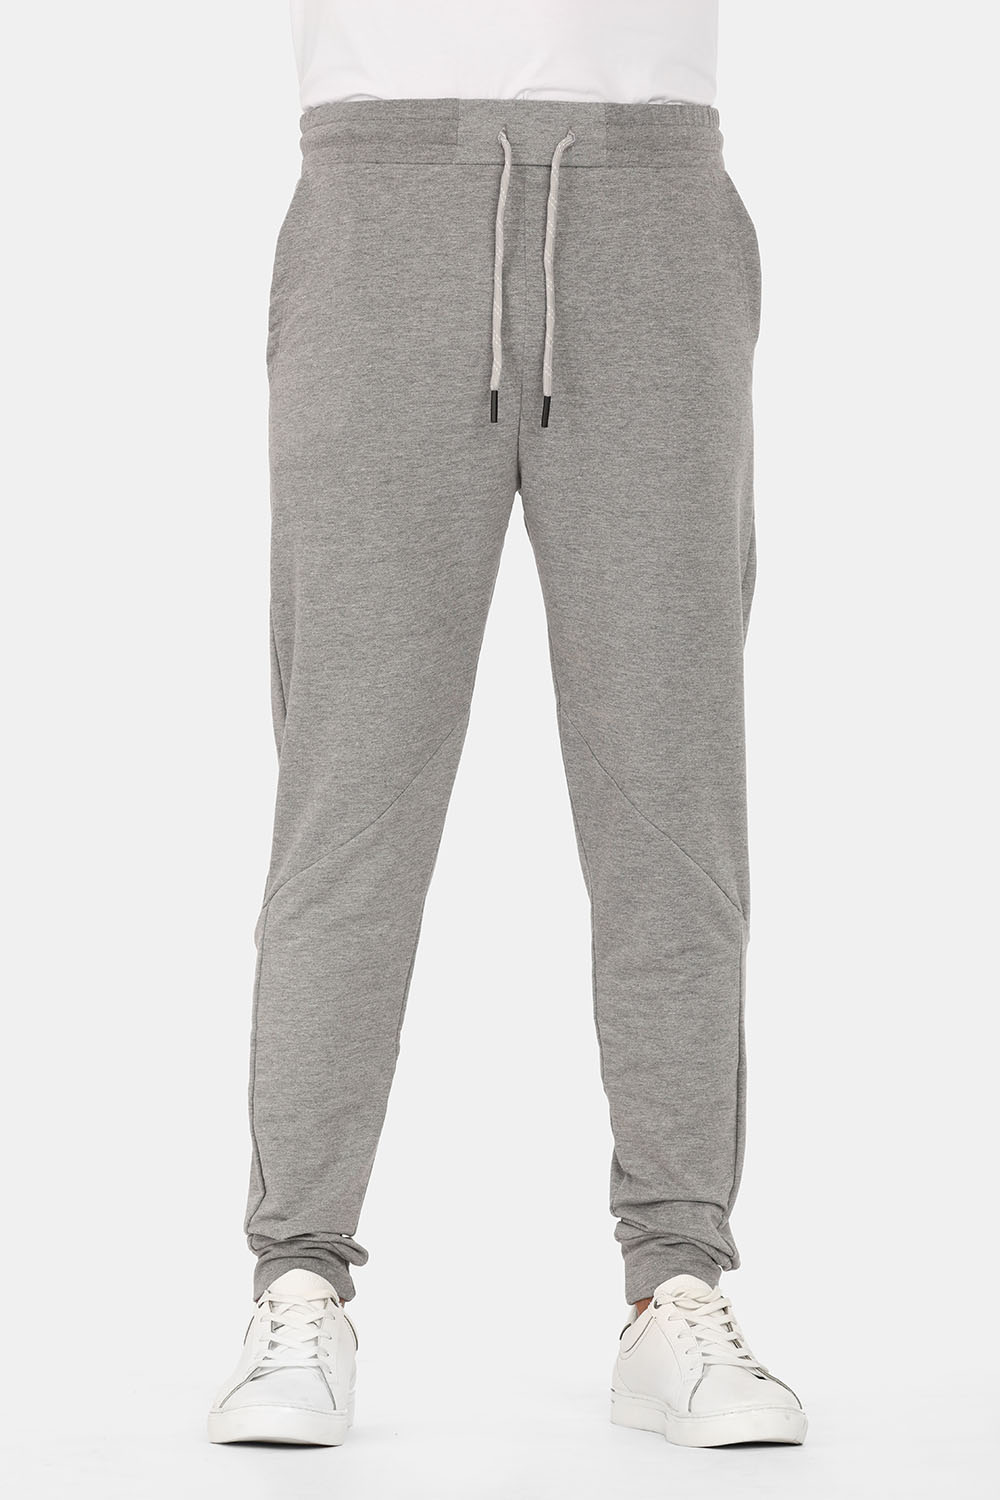 Diagnose Sherlock Holmes overlook New Fit Sweat Pants Gray – TiE HOUSE